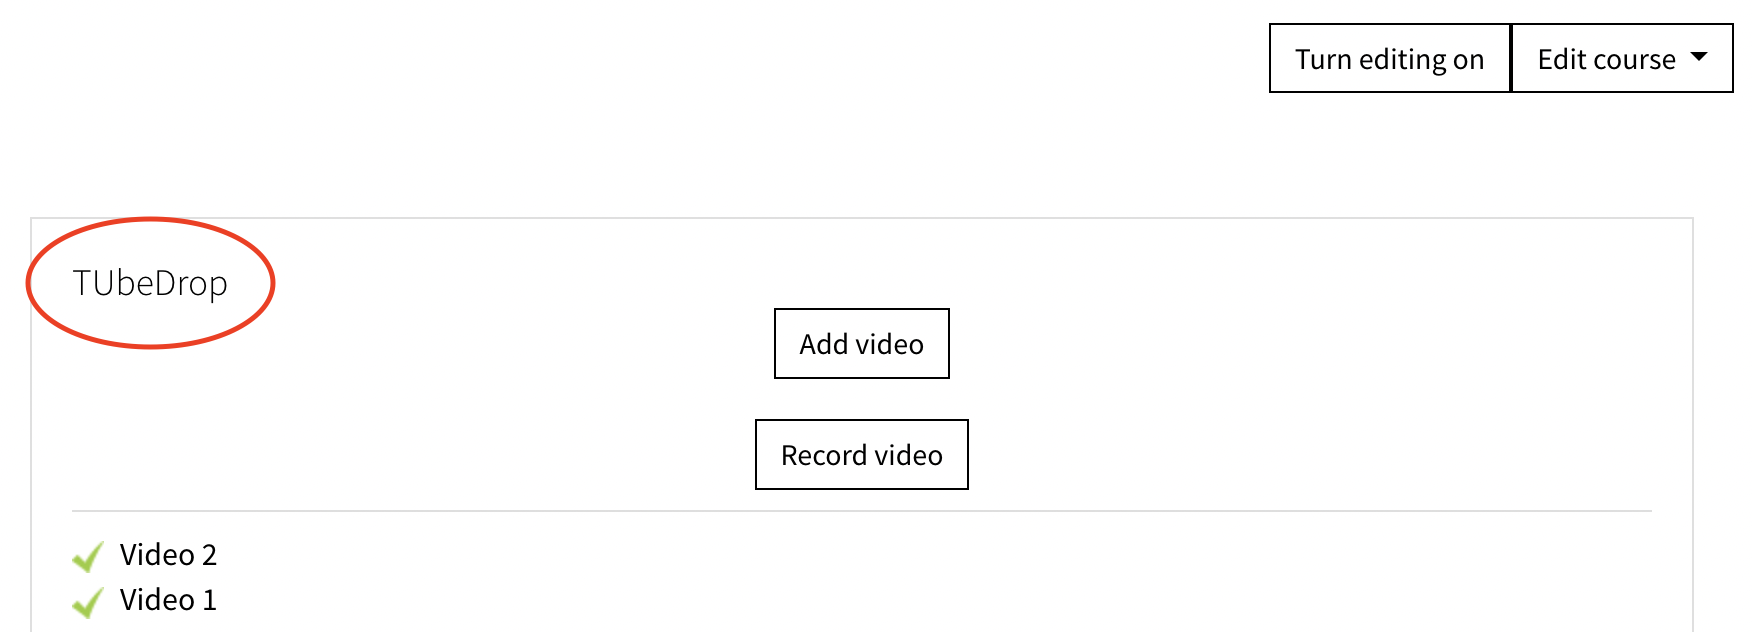 Screenshot of the TUbeDrop block with the option "add video" and "record video"; below, the most recent videos are listed